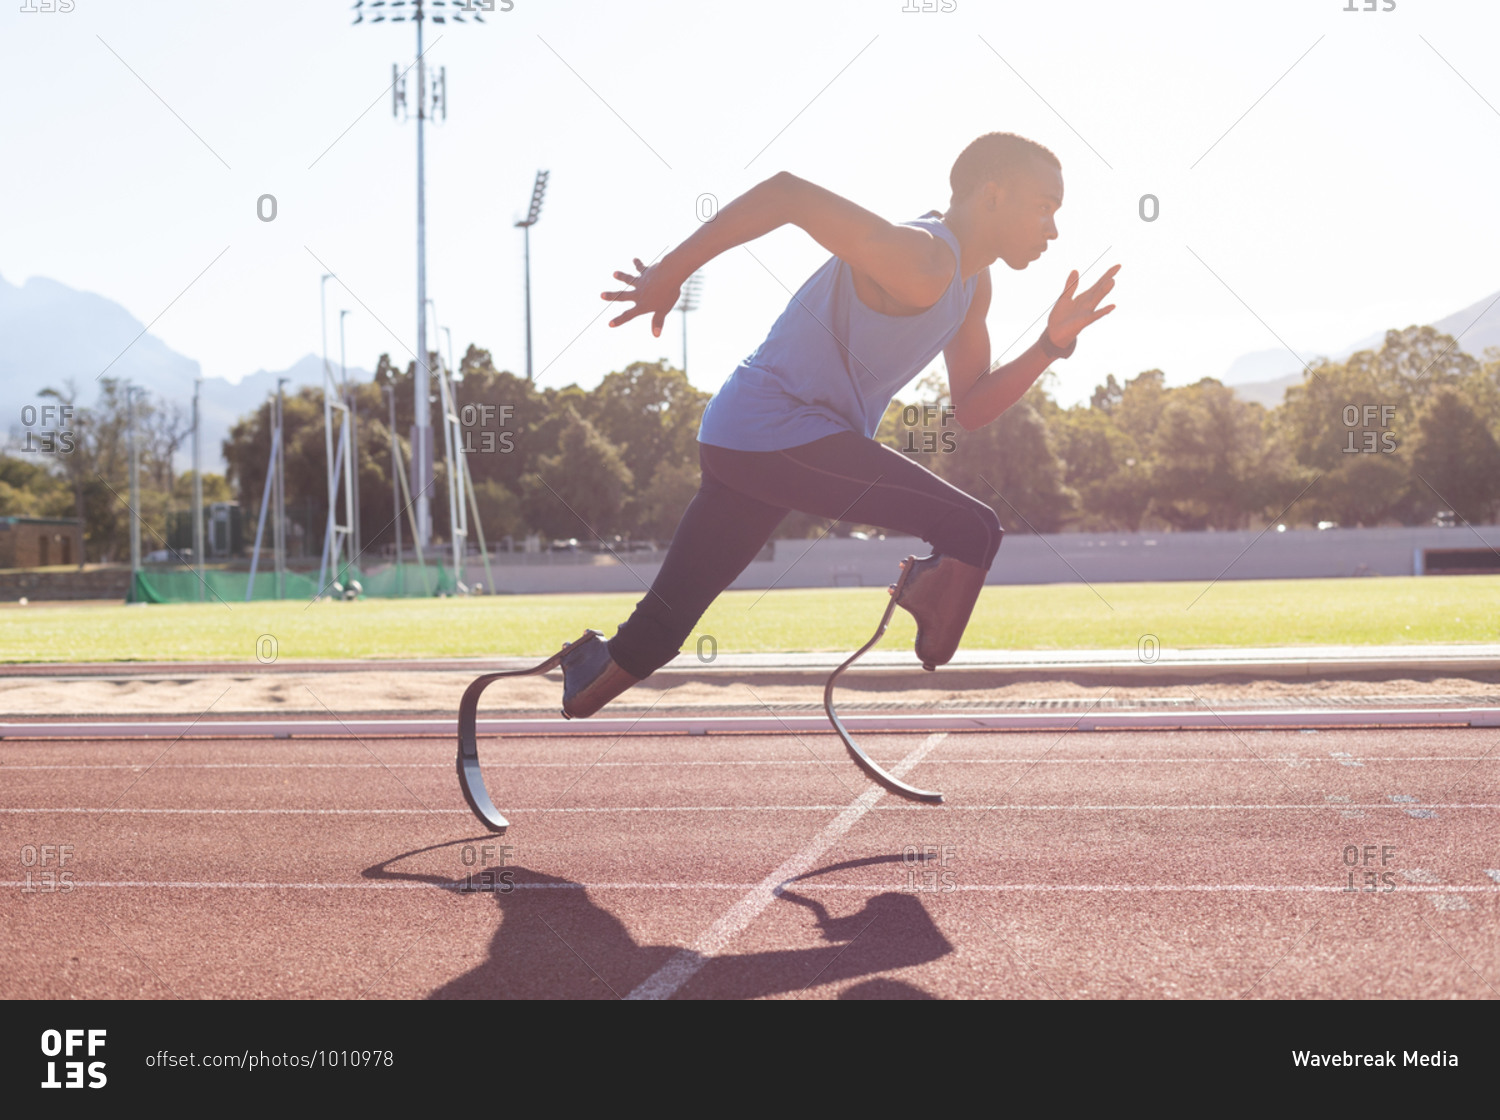 Fit, mixed race disabled male athlete at an outdoor sports stadium, running on race track wearing running blades. Disability athletics sport training.